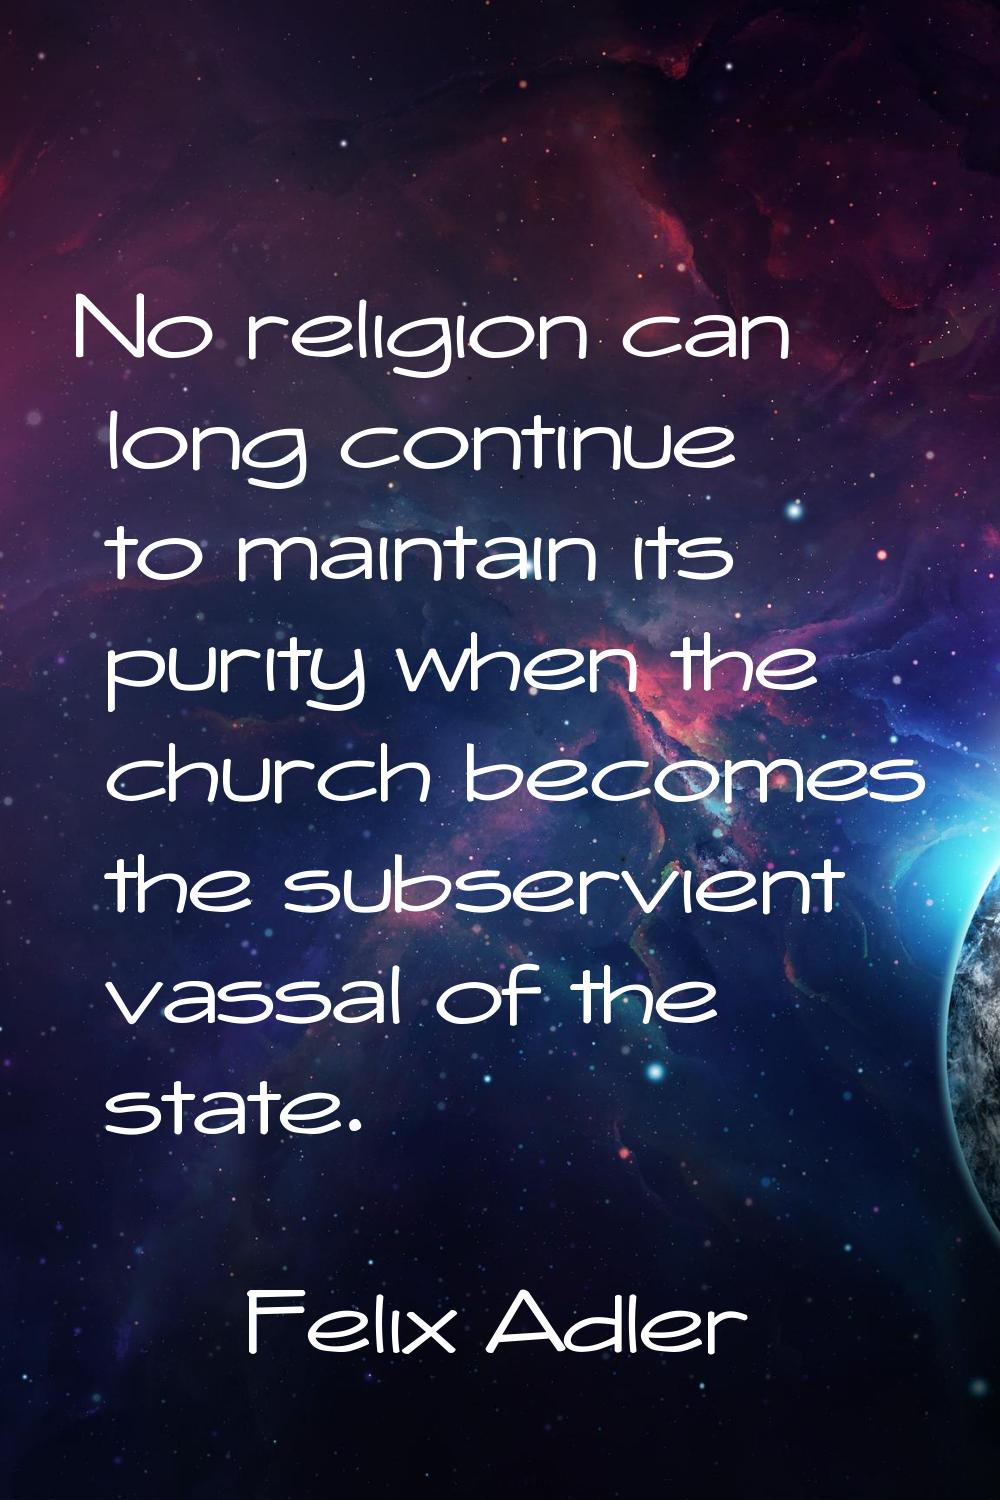 No religion can long continue to maintain its purity when the church becomes the subservient vassal